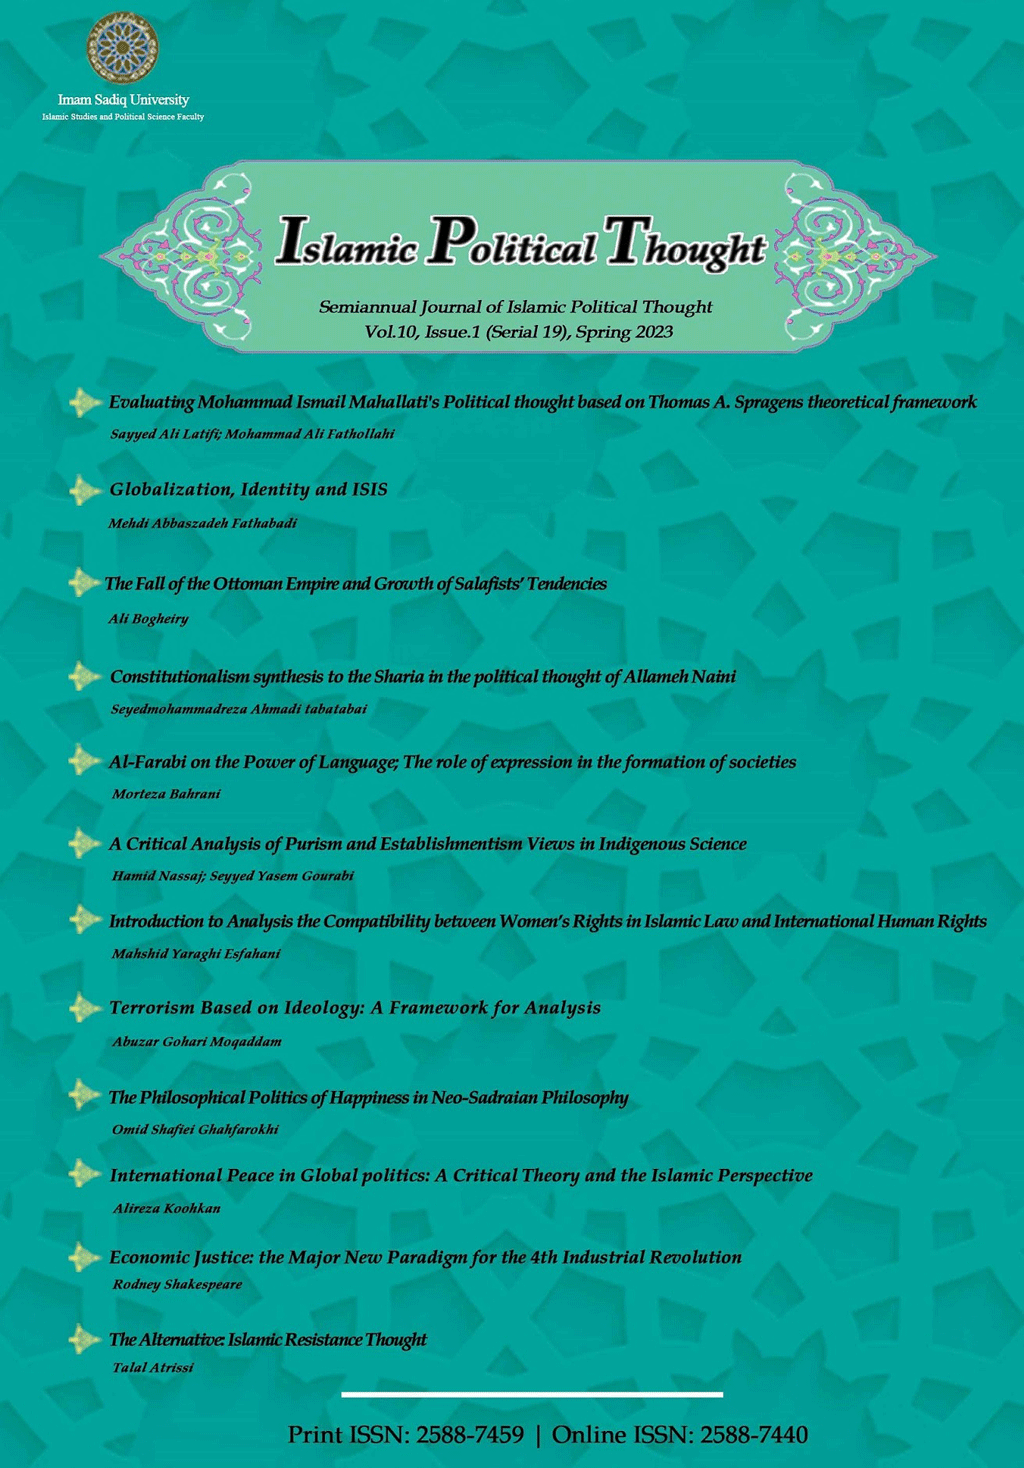 Islamic Political Thoughts - Spring 2016, Volume 3 - Number 1